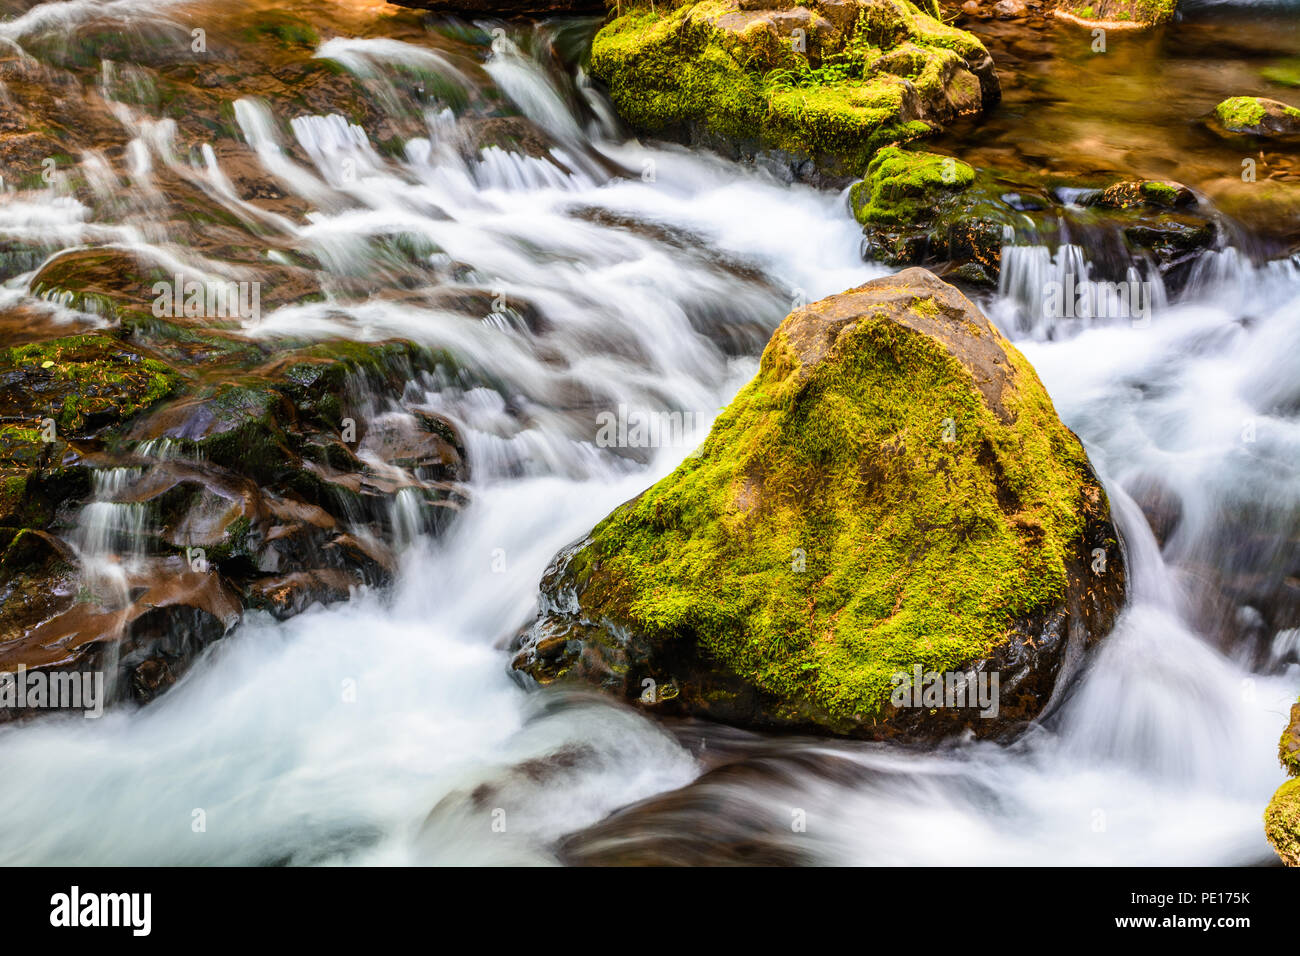 A moss covered boulder sits adjacent to several small cascading waterfalls along Panther Creek in Southern Washington. Stock Photo